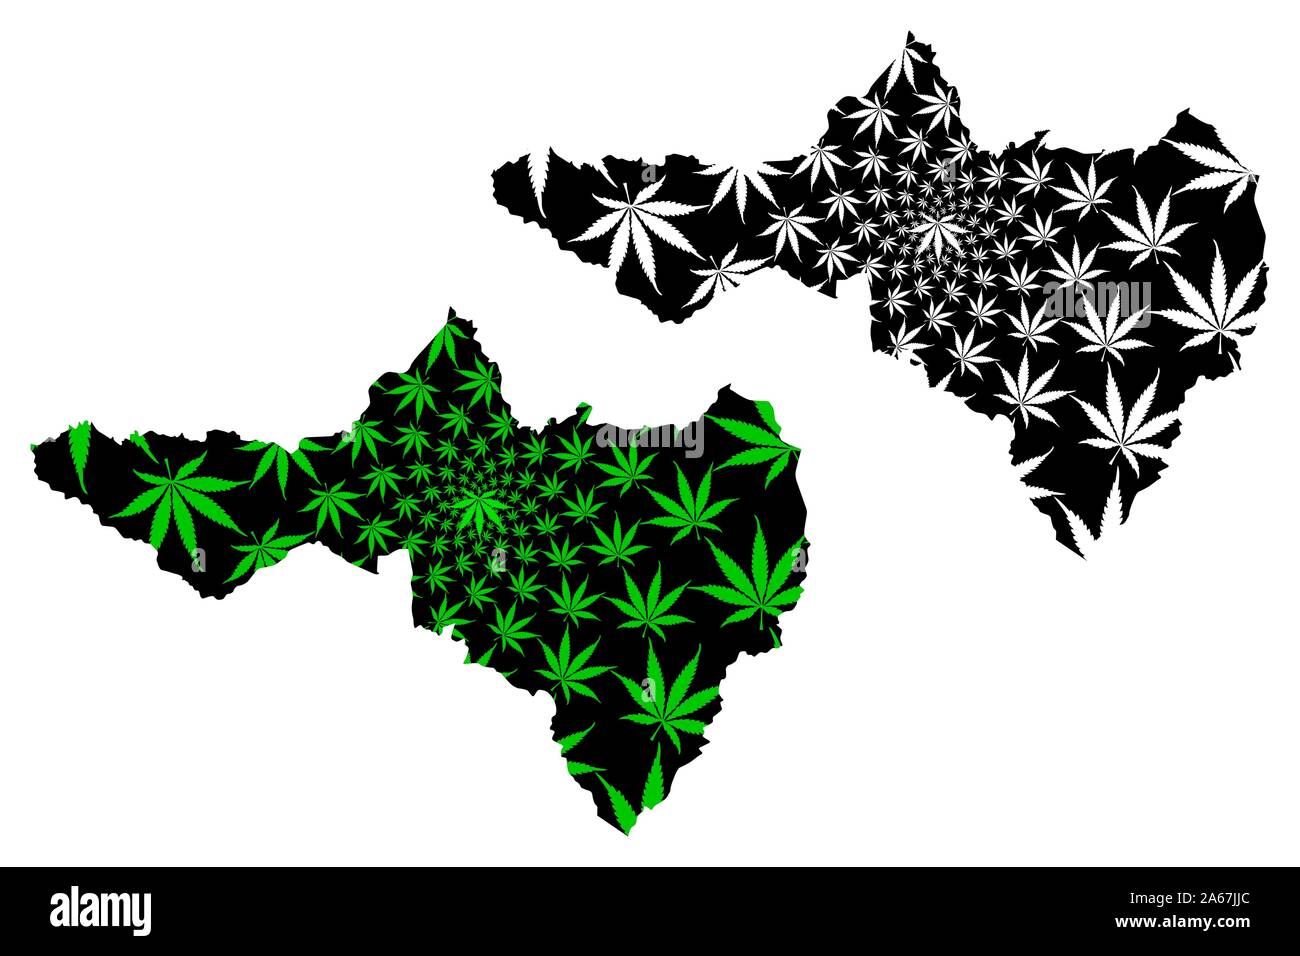 Nakhon Sawan Province (Kingdom of Thailand, Siam, Provinces of Thailand) map is designed cannabis leaf green and black, Nakhon Sawan map made of marij Stock Vector